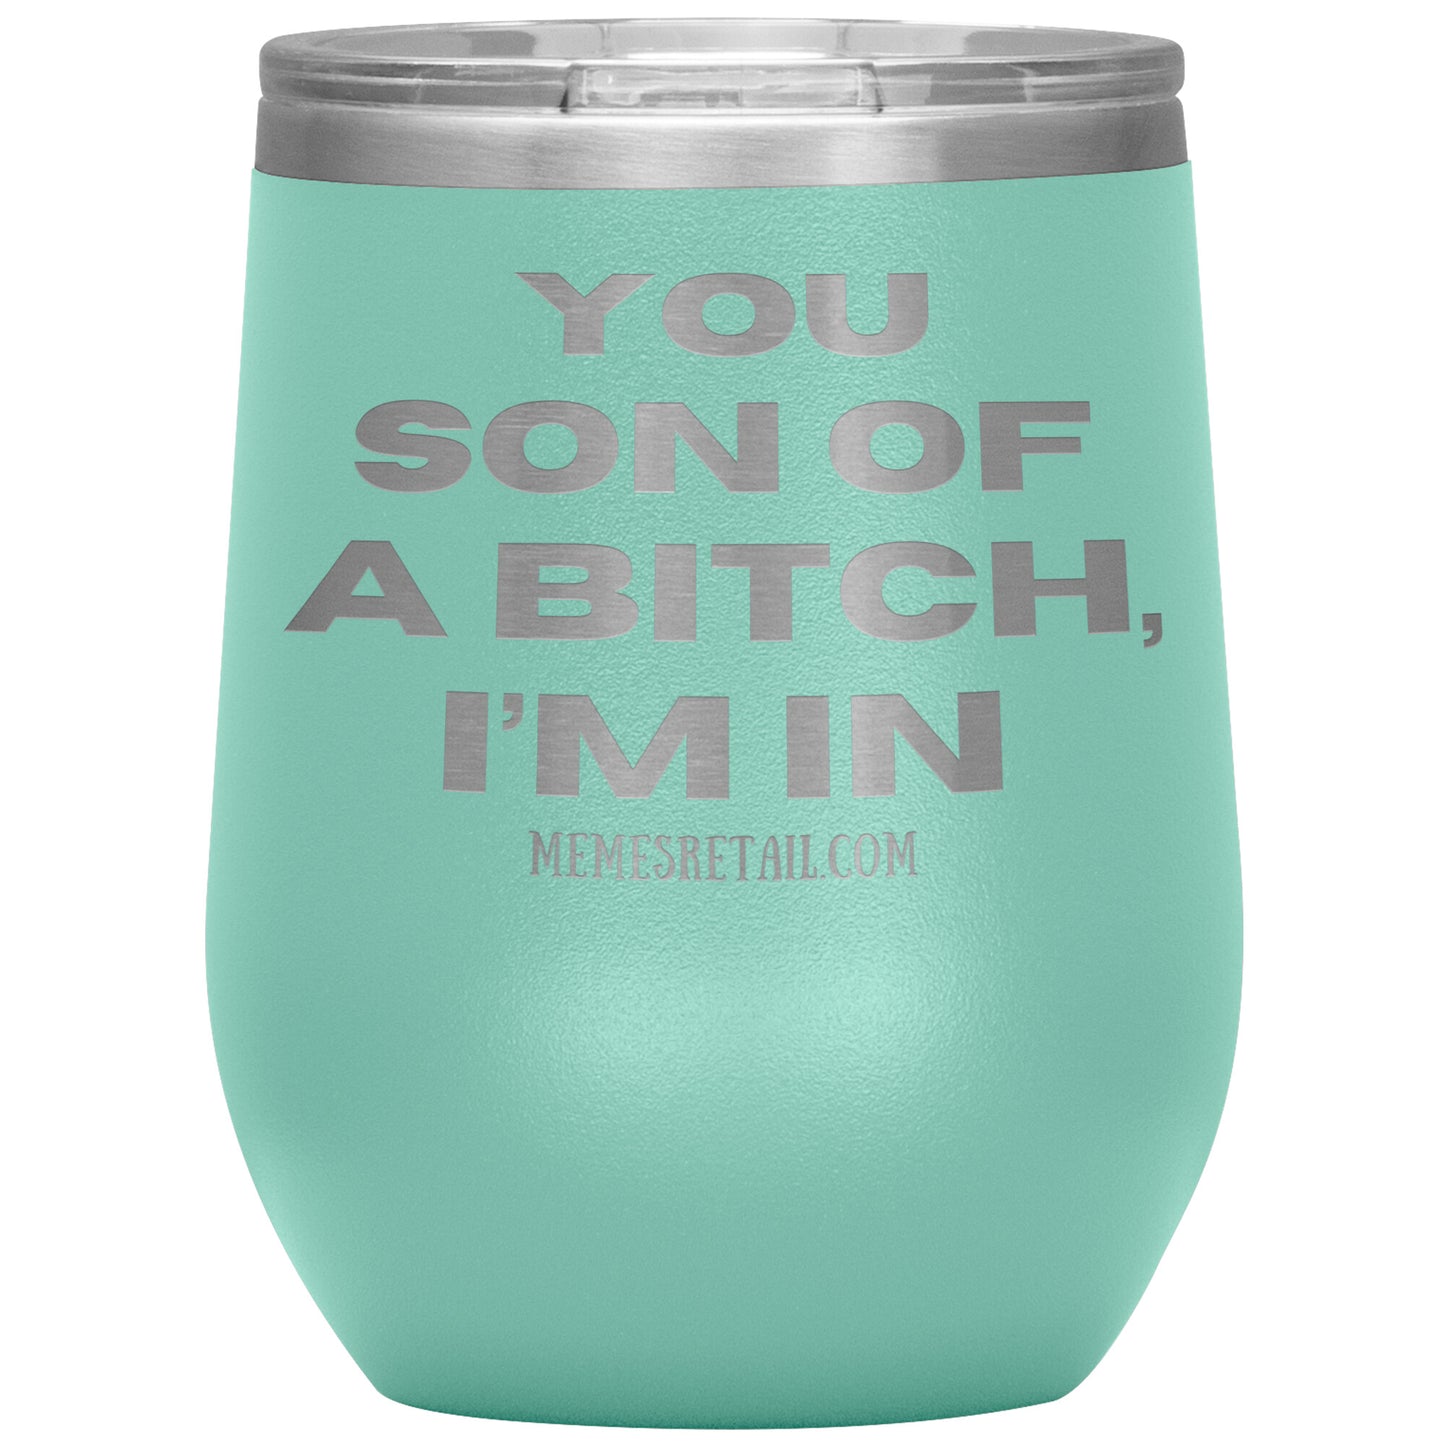 You son of a bitch, I’m in Tumblers, 12oz Wine Insulated Tumbler / Teal - MemesRetail.com